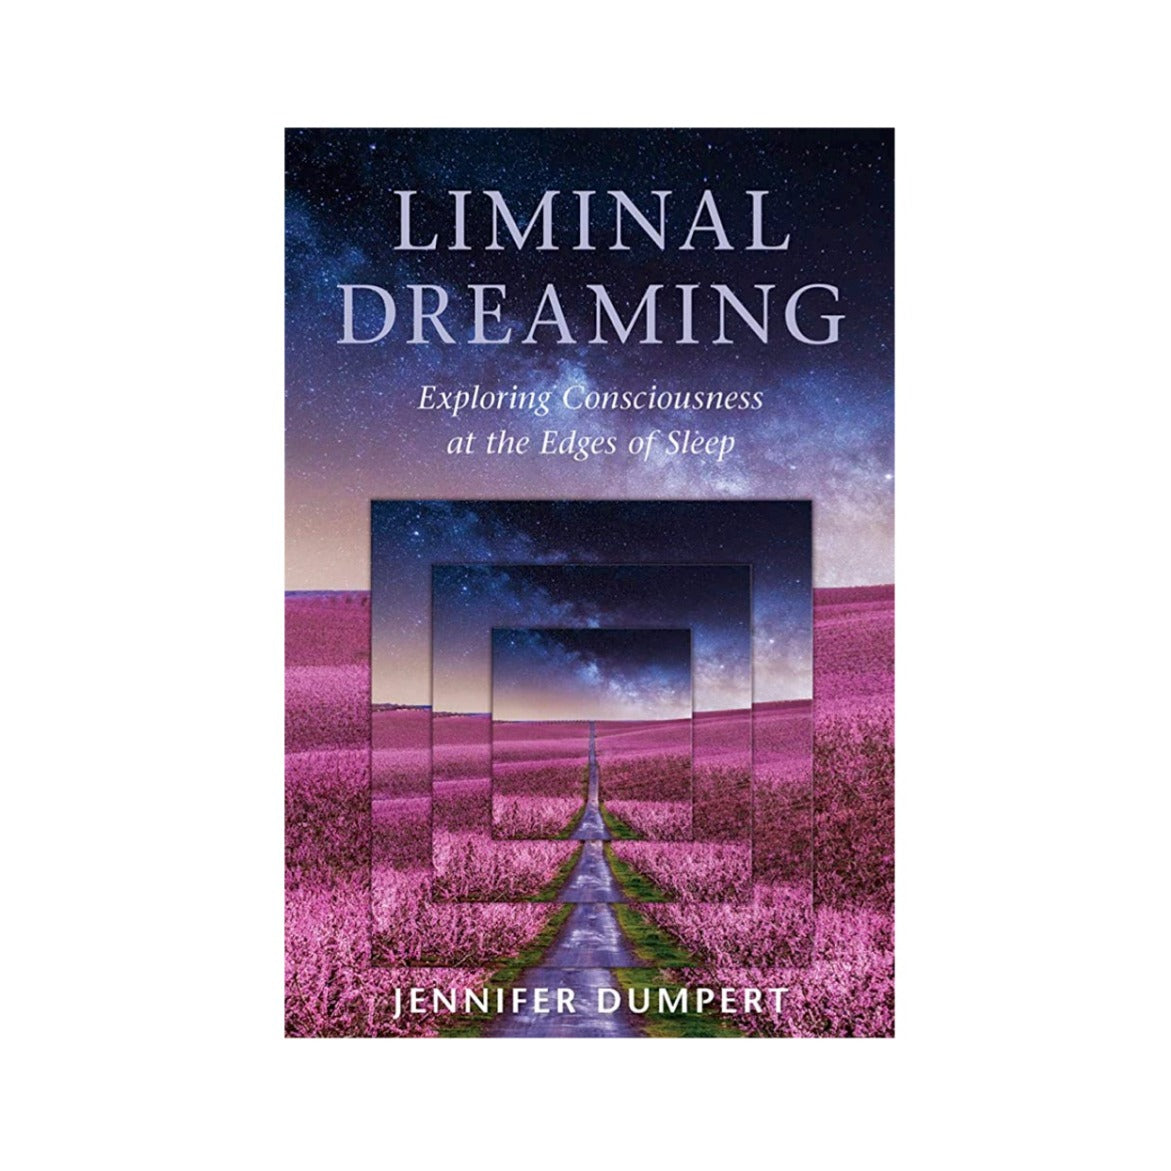 Liminal Dreaming: Exploring Consciousness at the Edges of Sleep by Jennifer Dumpert